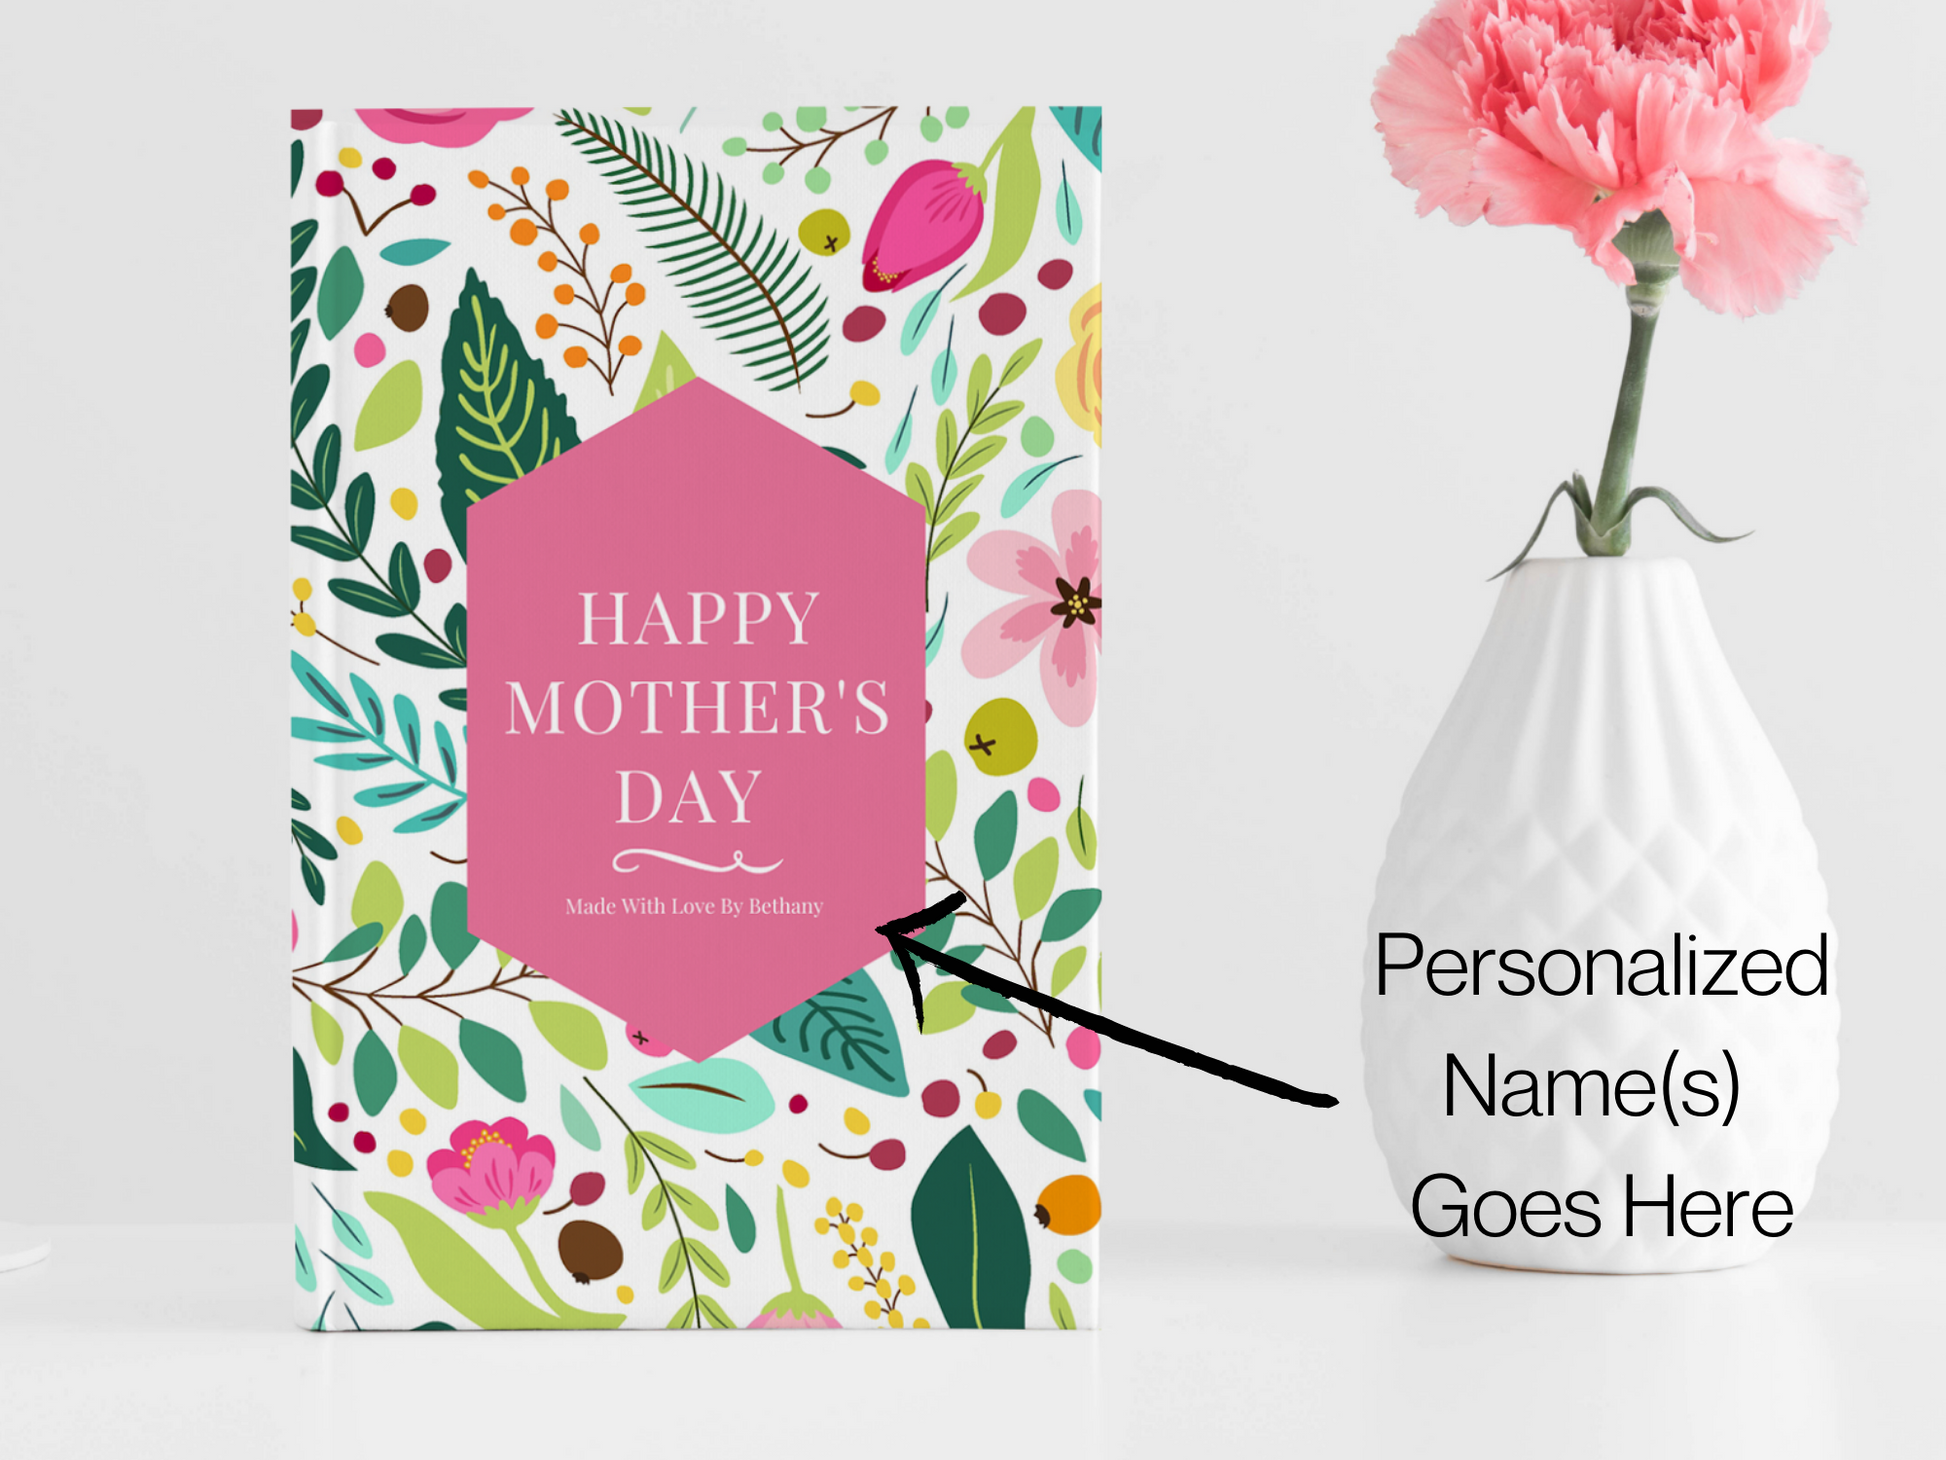 Personalization for mothers day gift. Happy mothers day book. Luhvee Books.